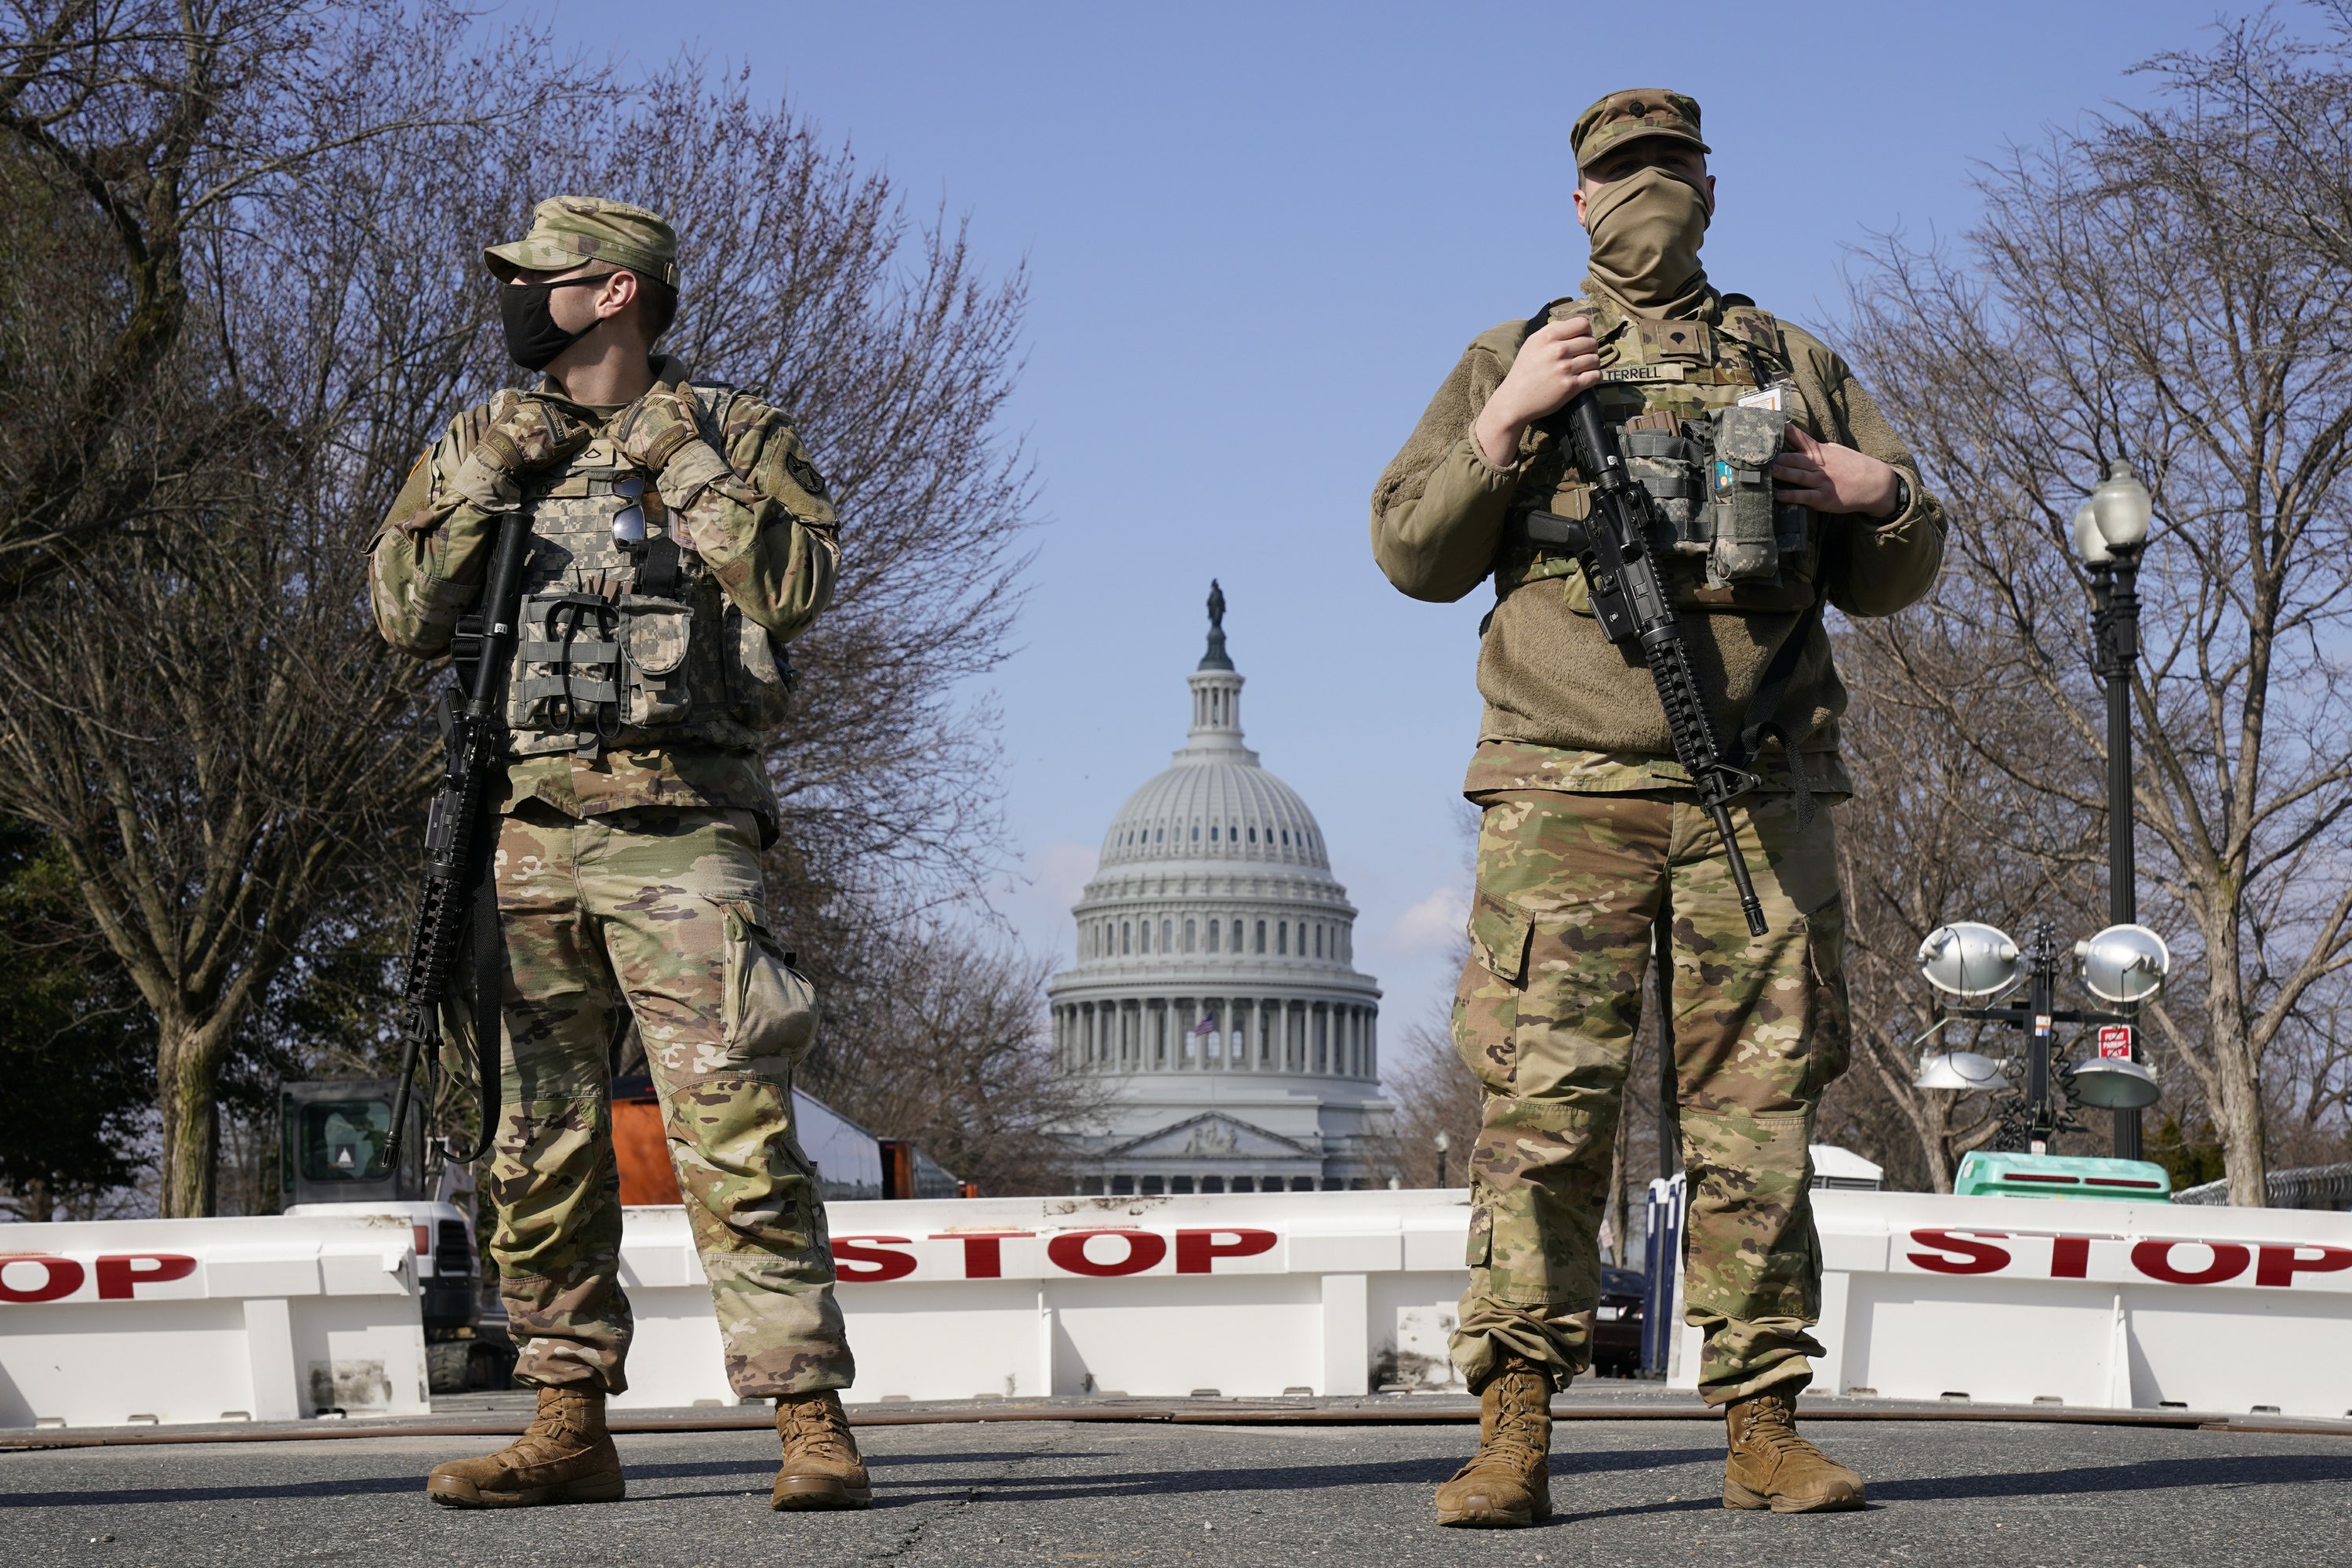 Police on alert after US Capitol conspiracy warning